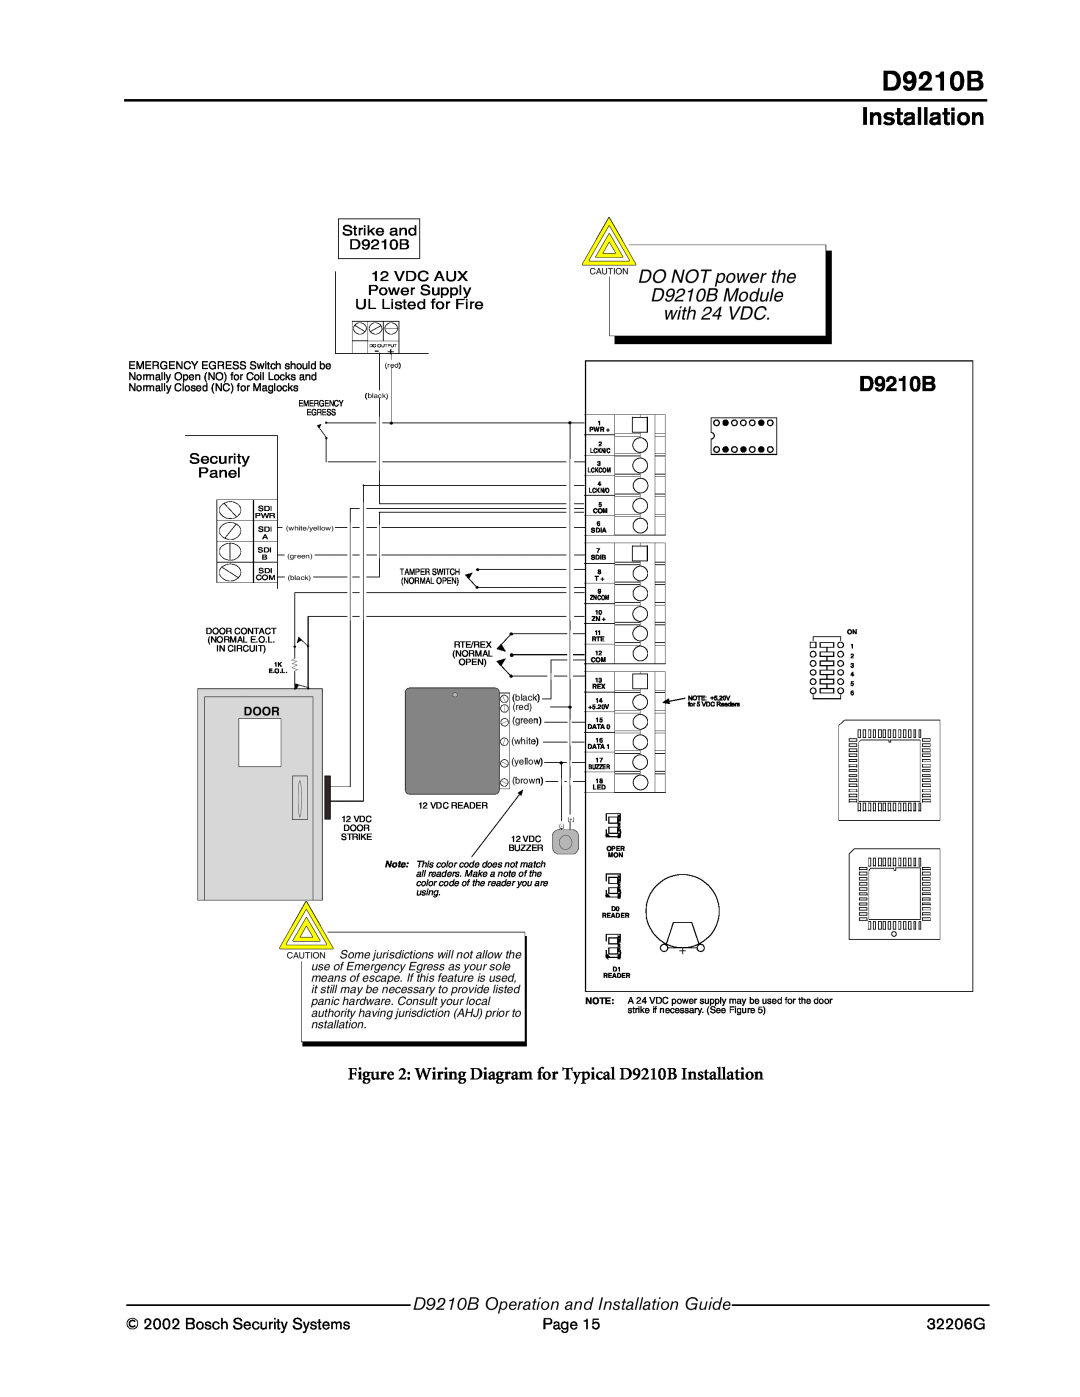 Bosch Appliances Wiring Diagram for Typical D9210B Installation, CAUTION DO NOT power the, with 24 VDC, D9210B Module 